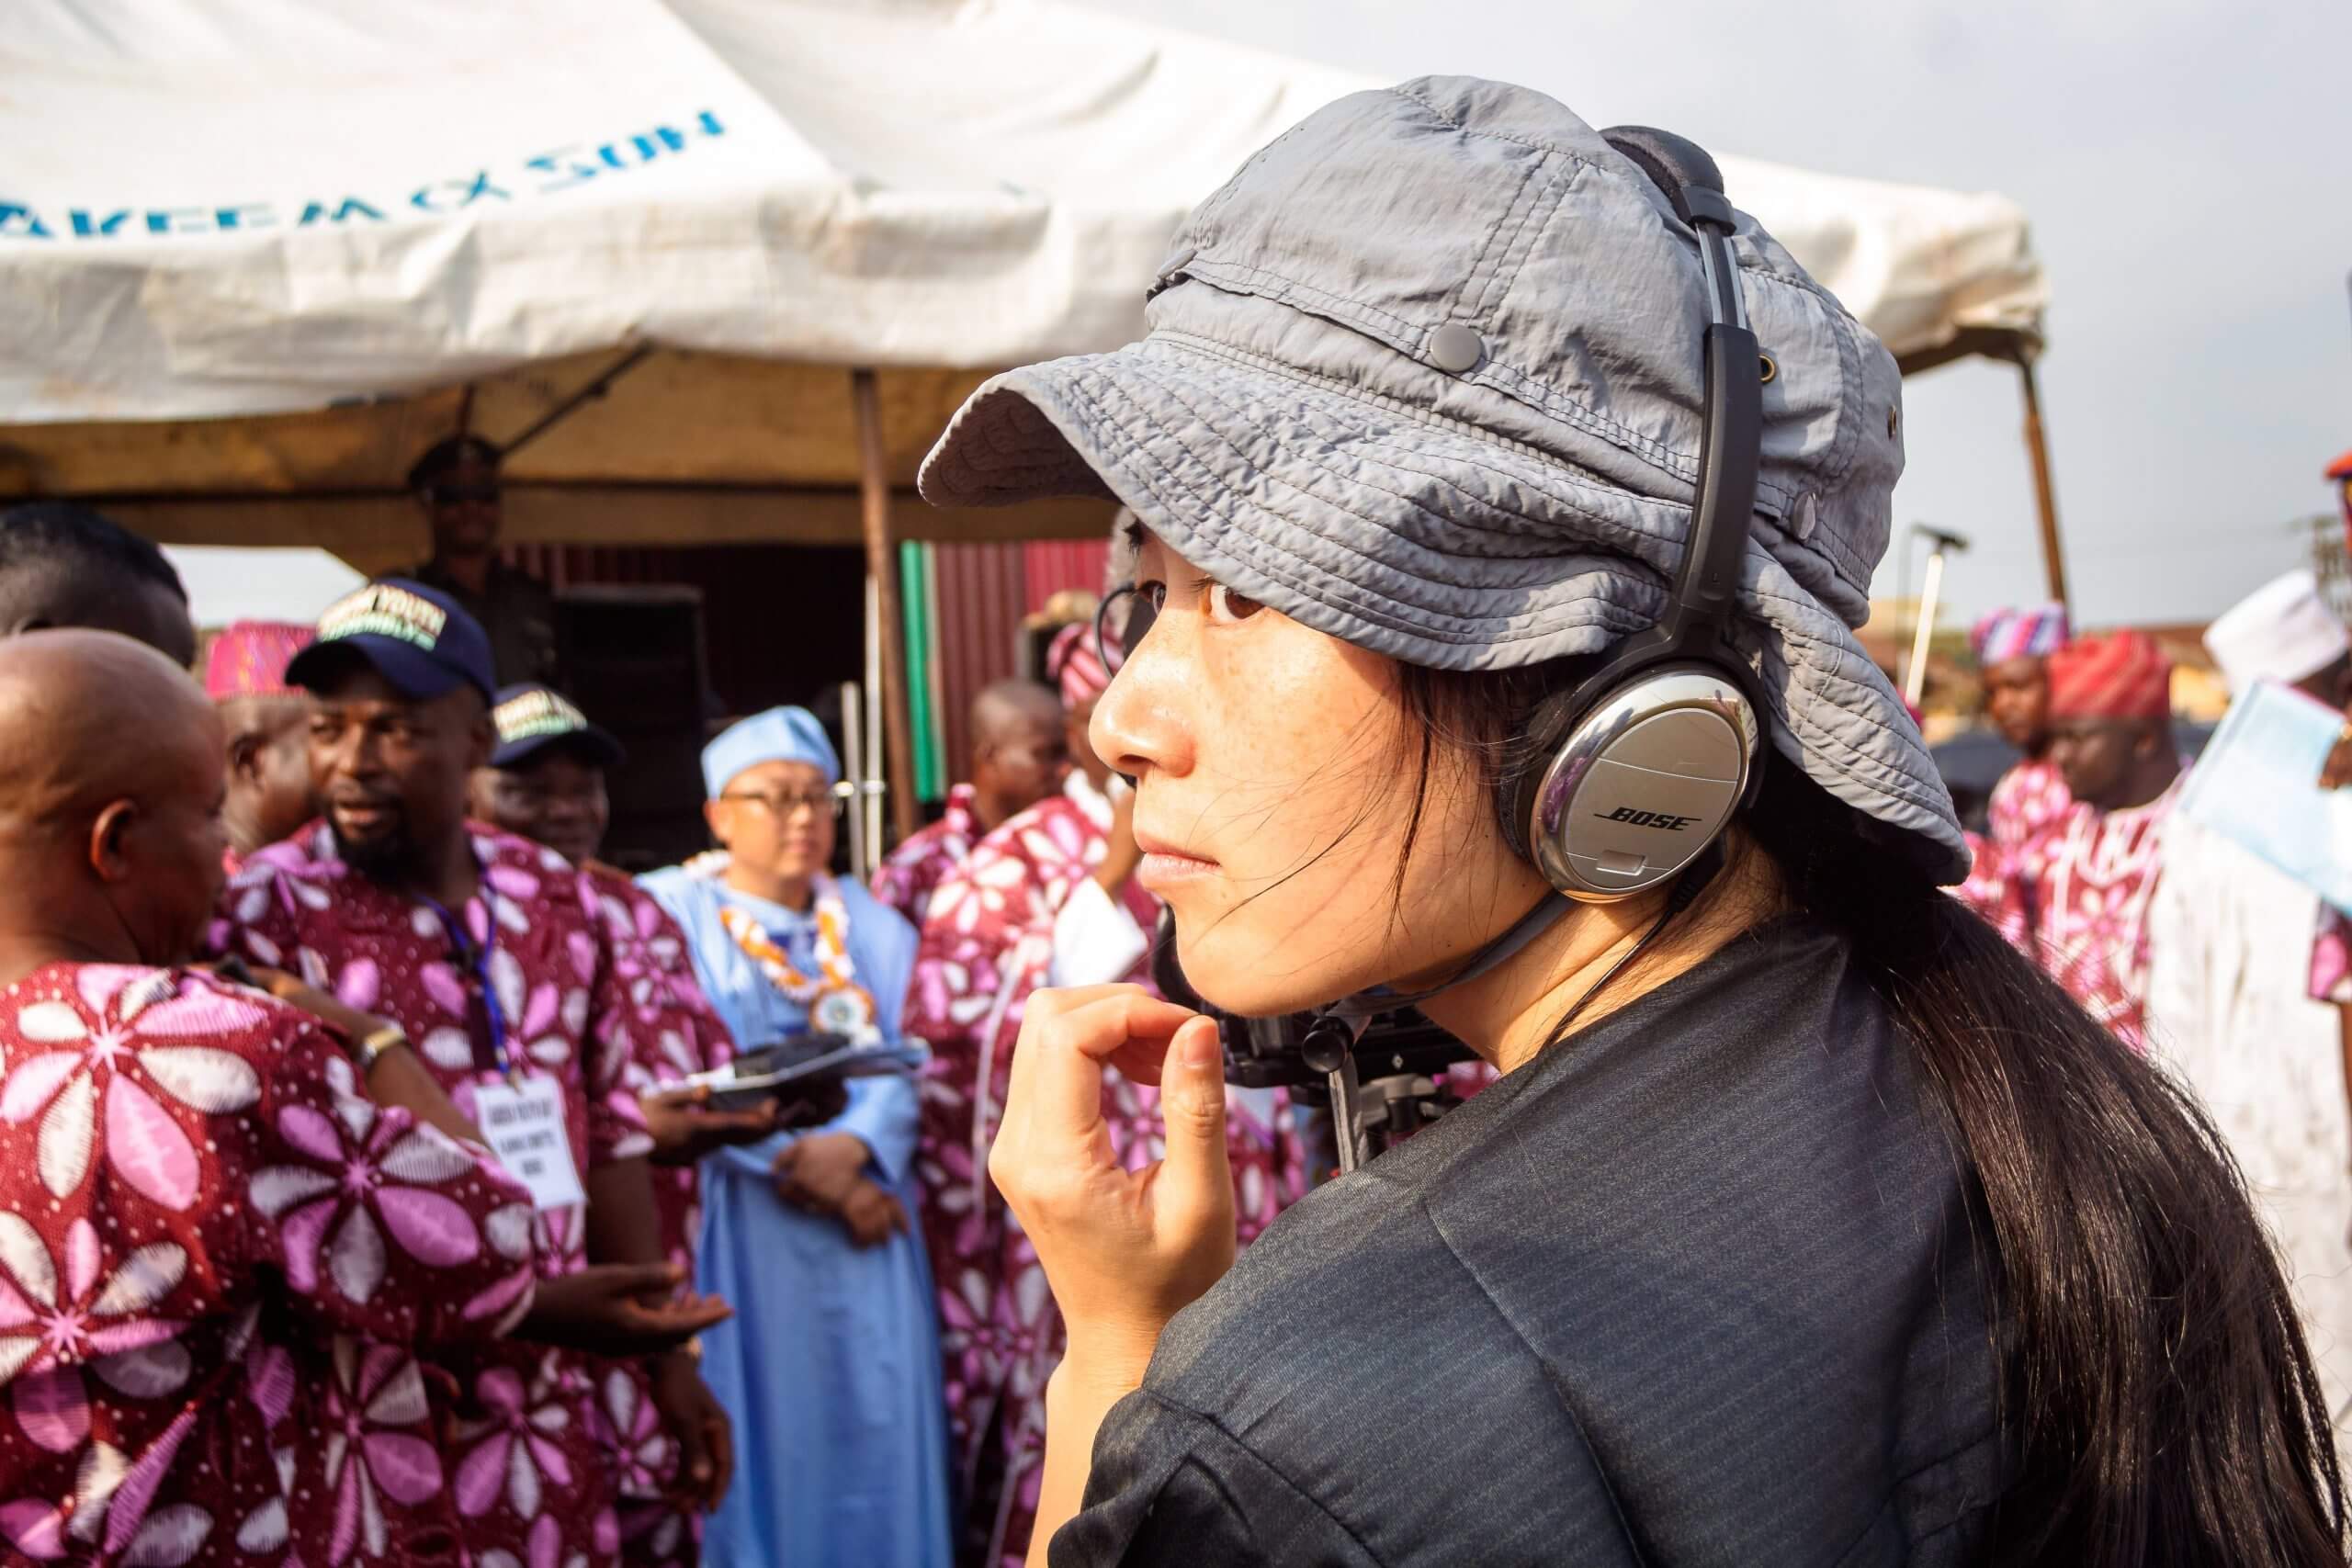 Production still of Jialing Zhang. She is wearing a wide-brimmed hat and headphones. She is pictured from the back, looking to the side and out of the frame. Behind her, slightly focused, there is a group of men in brightly-colored and patterned clothes.